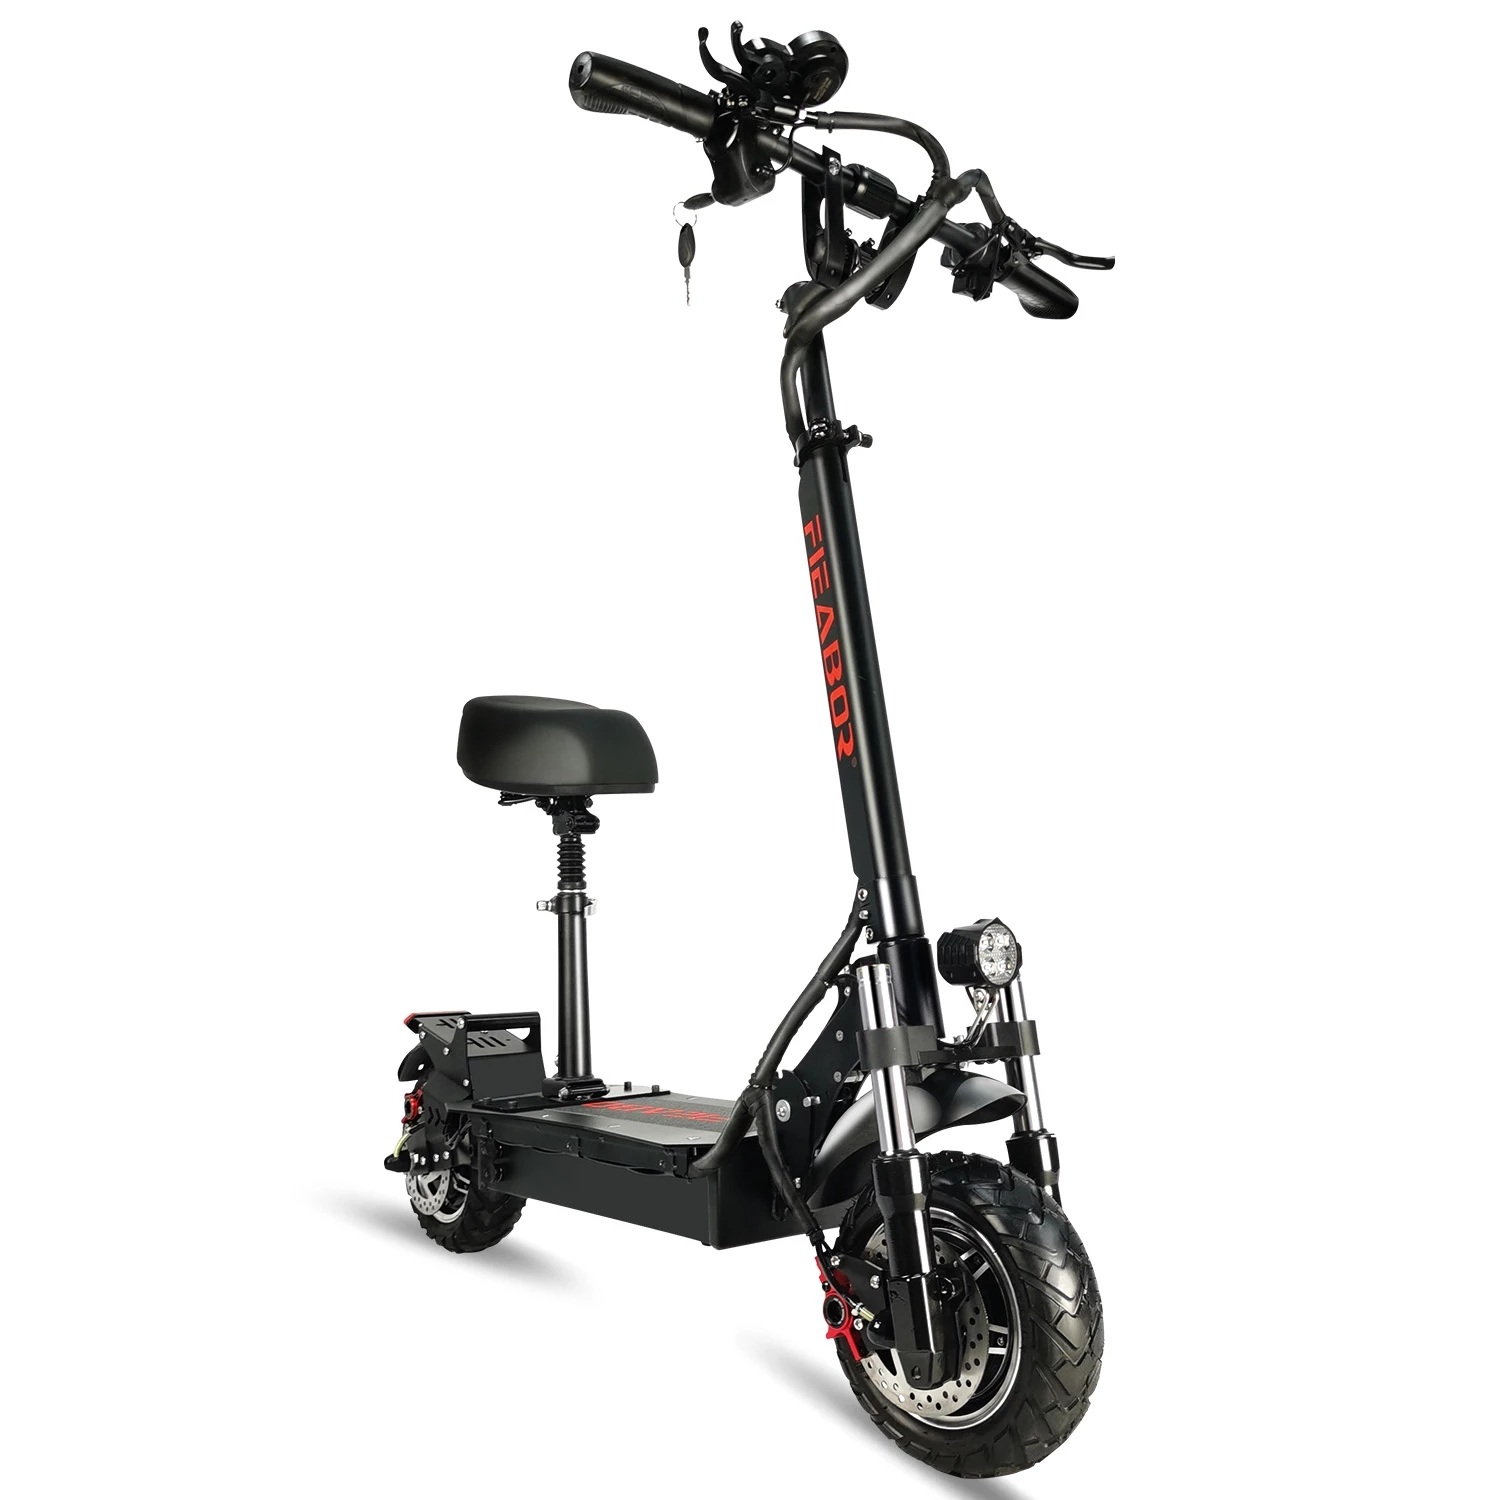 Find EU DIRECT FIEABOR Q08P Oil Brake 2400W 60V 27Ah Dual Motor 10 5 Inch Electric Scooter 200Kg Max Load 60 80Km Range for Sale on Gipsybee.com with cryptocurrencies